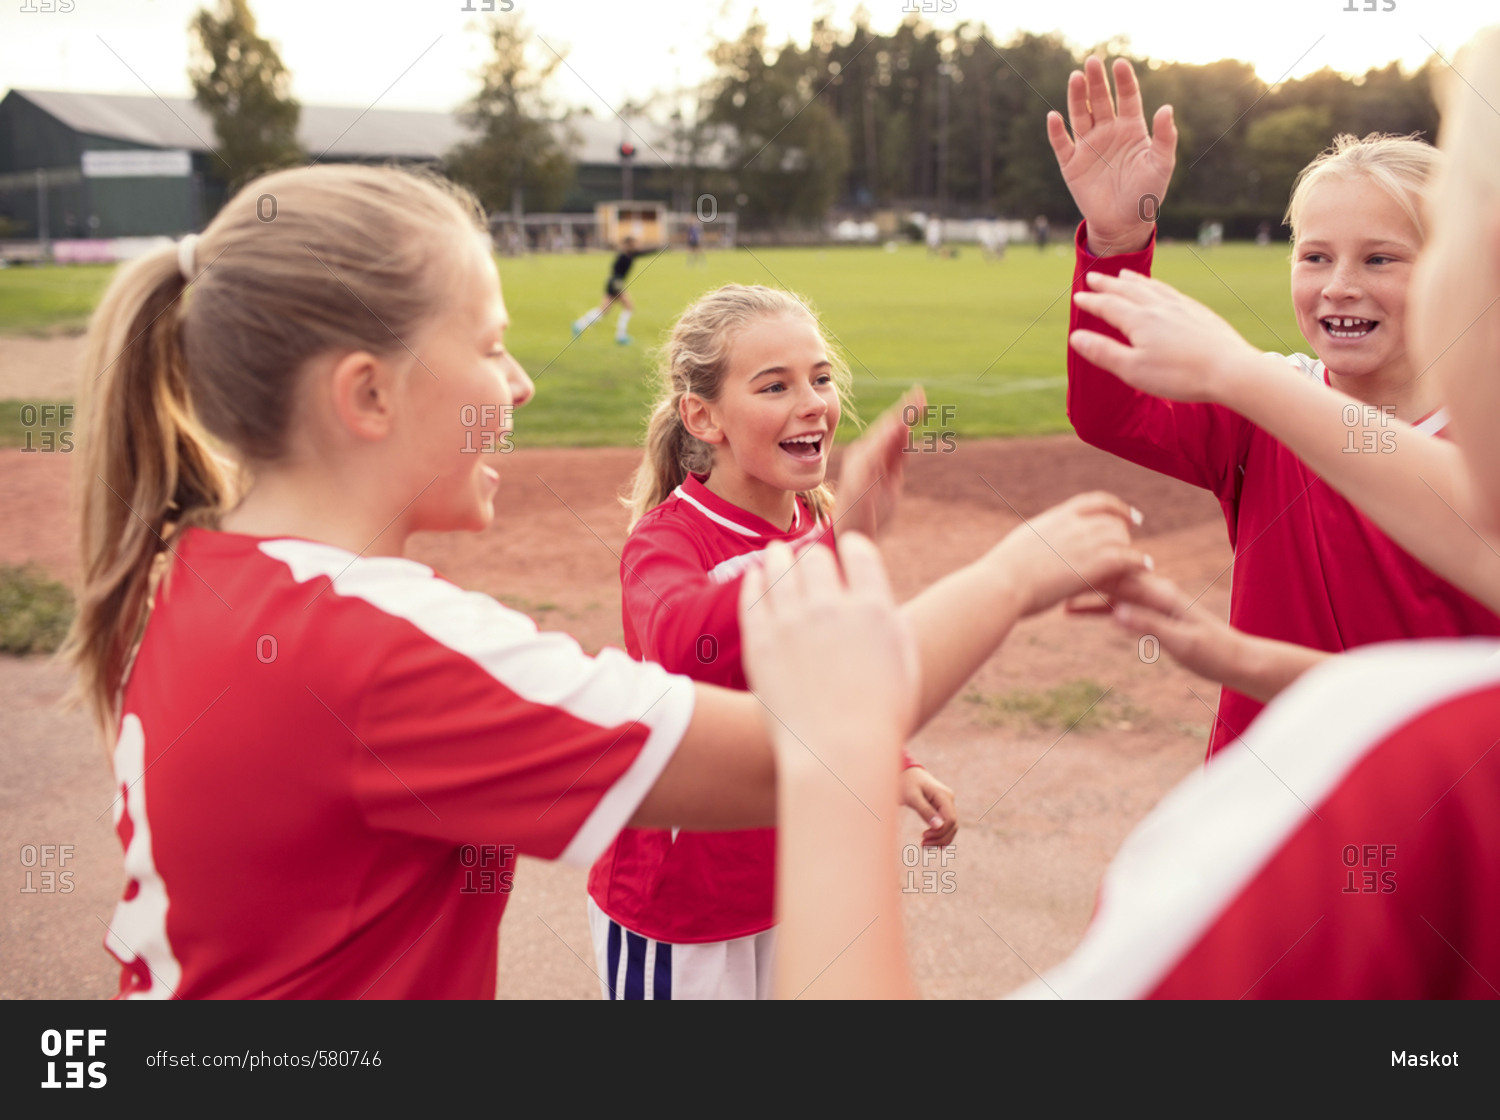 Playful female soccer players standing against field